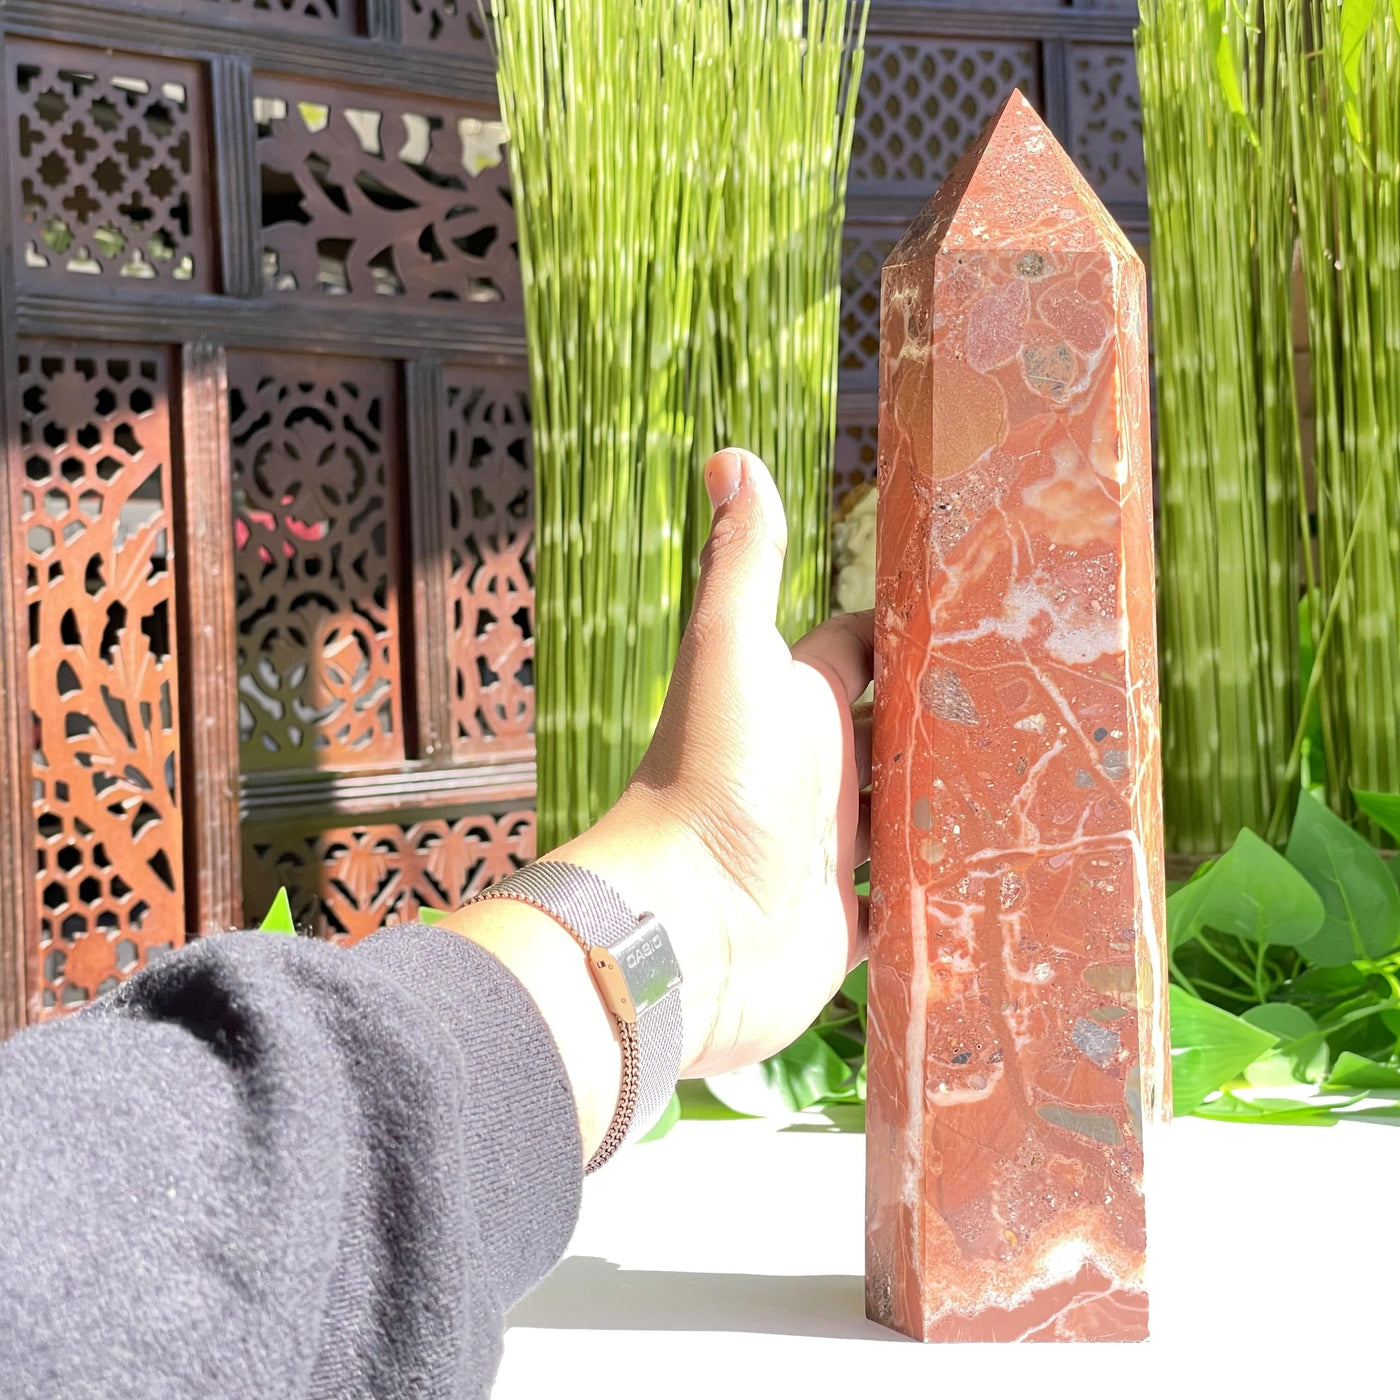 A handing comparing its size to the tall red Jasper Tower